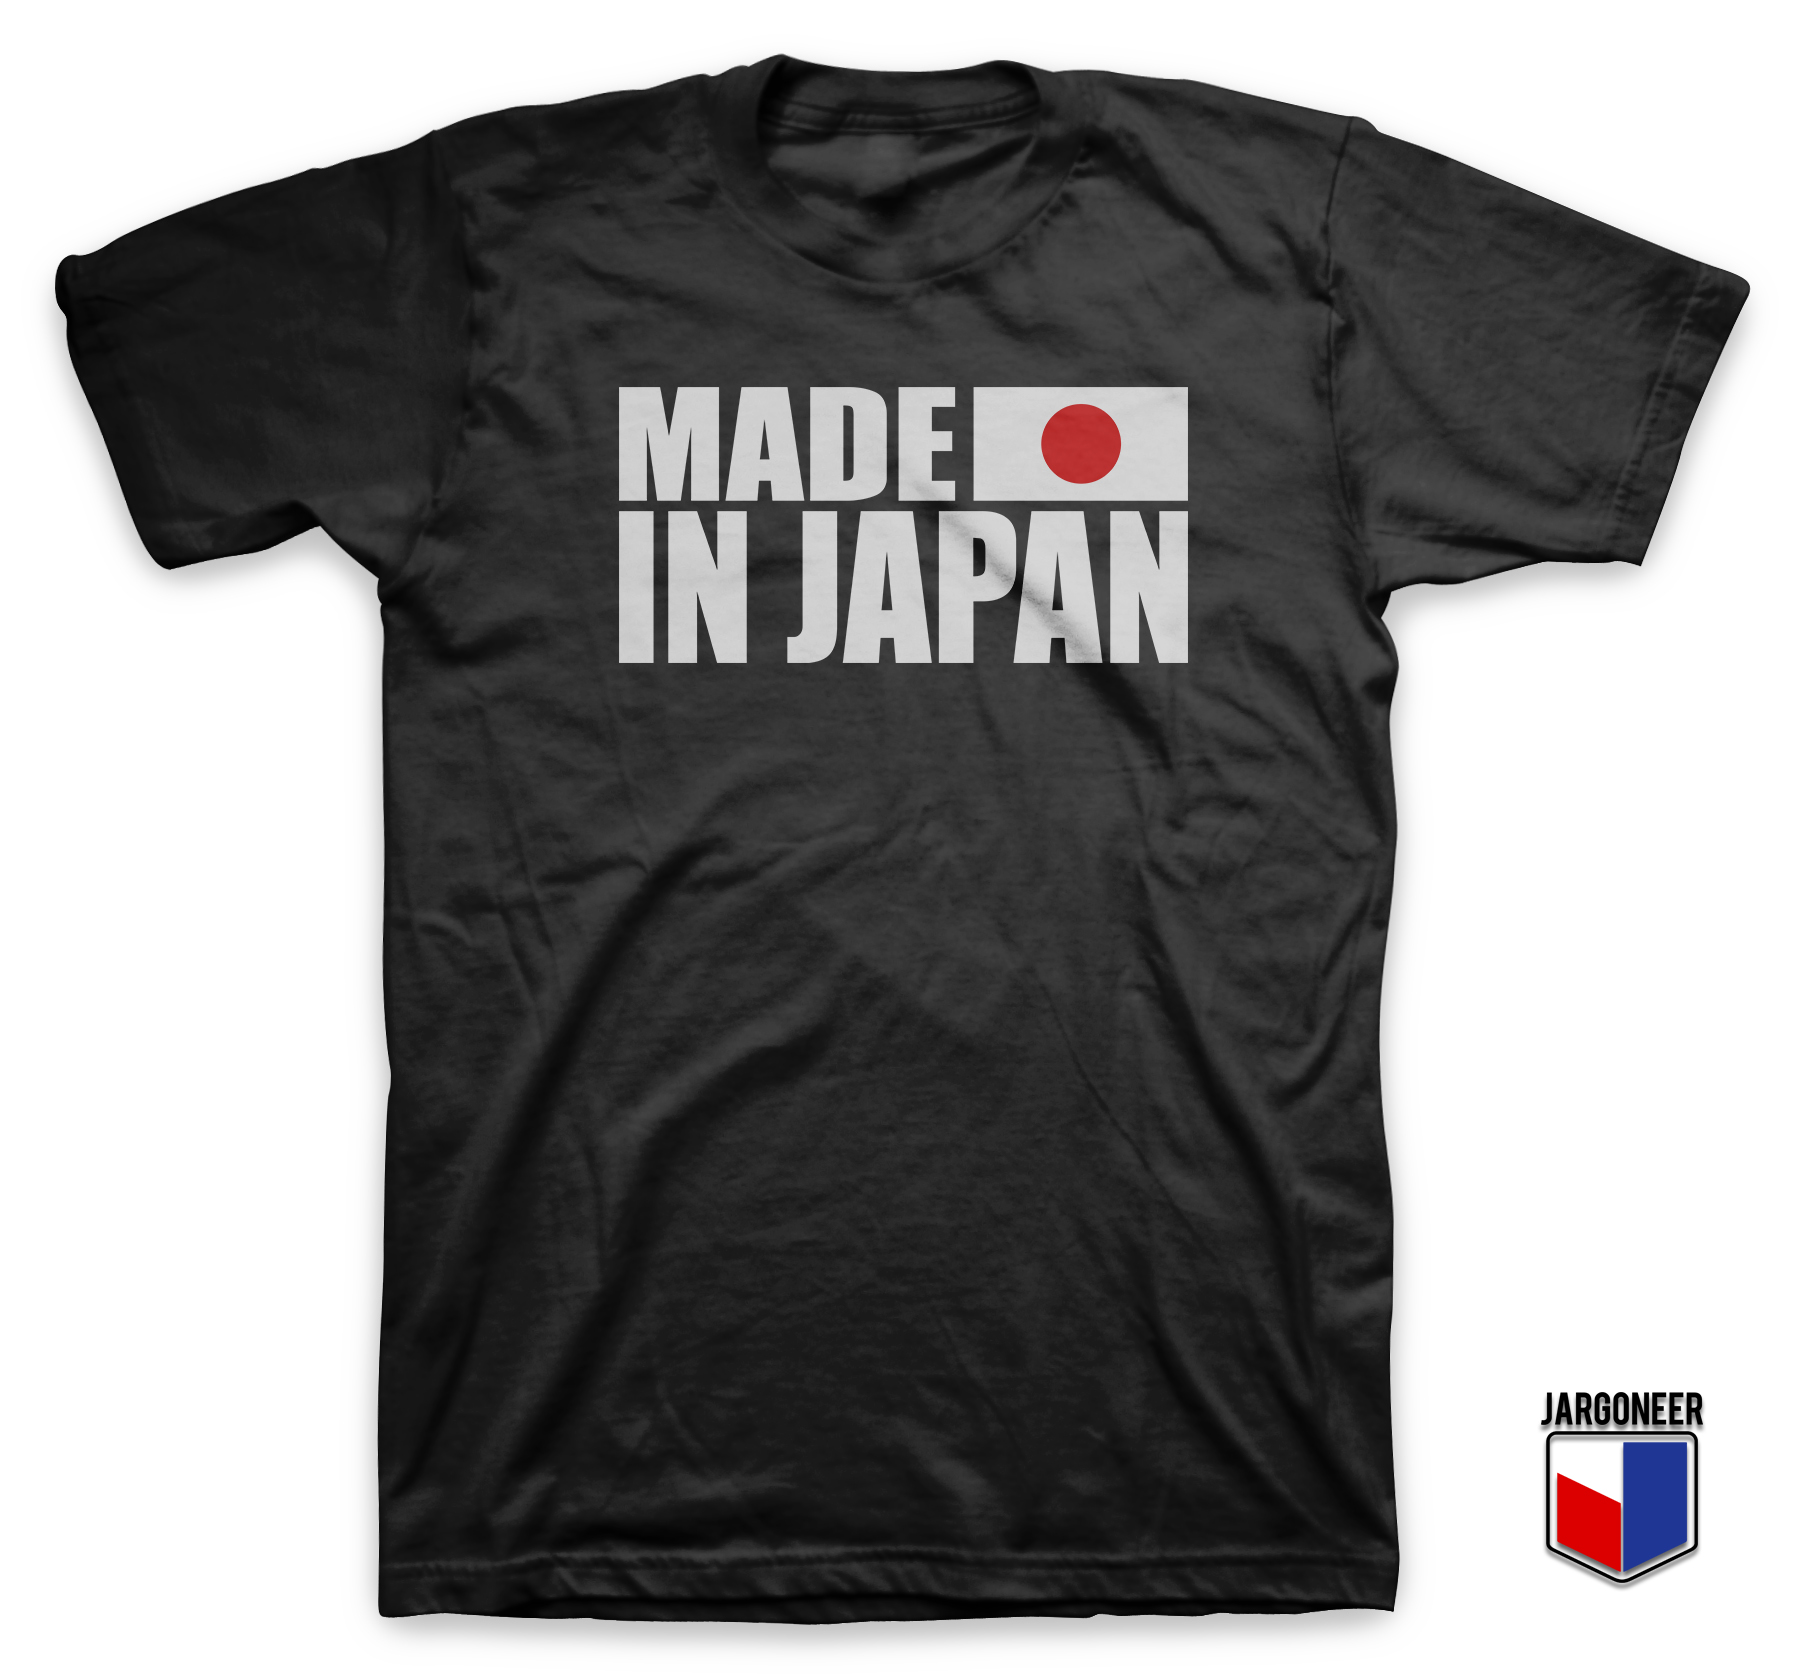 Only quality. Made in Japan одежда. Футболки Human made in Japan. Cool Shirt. Follow the Sun футболка.